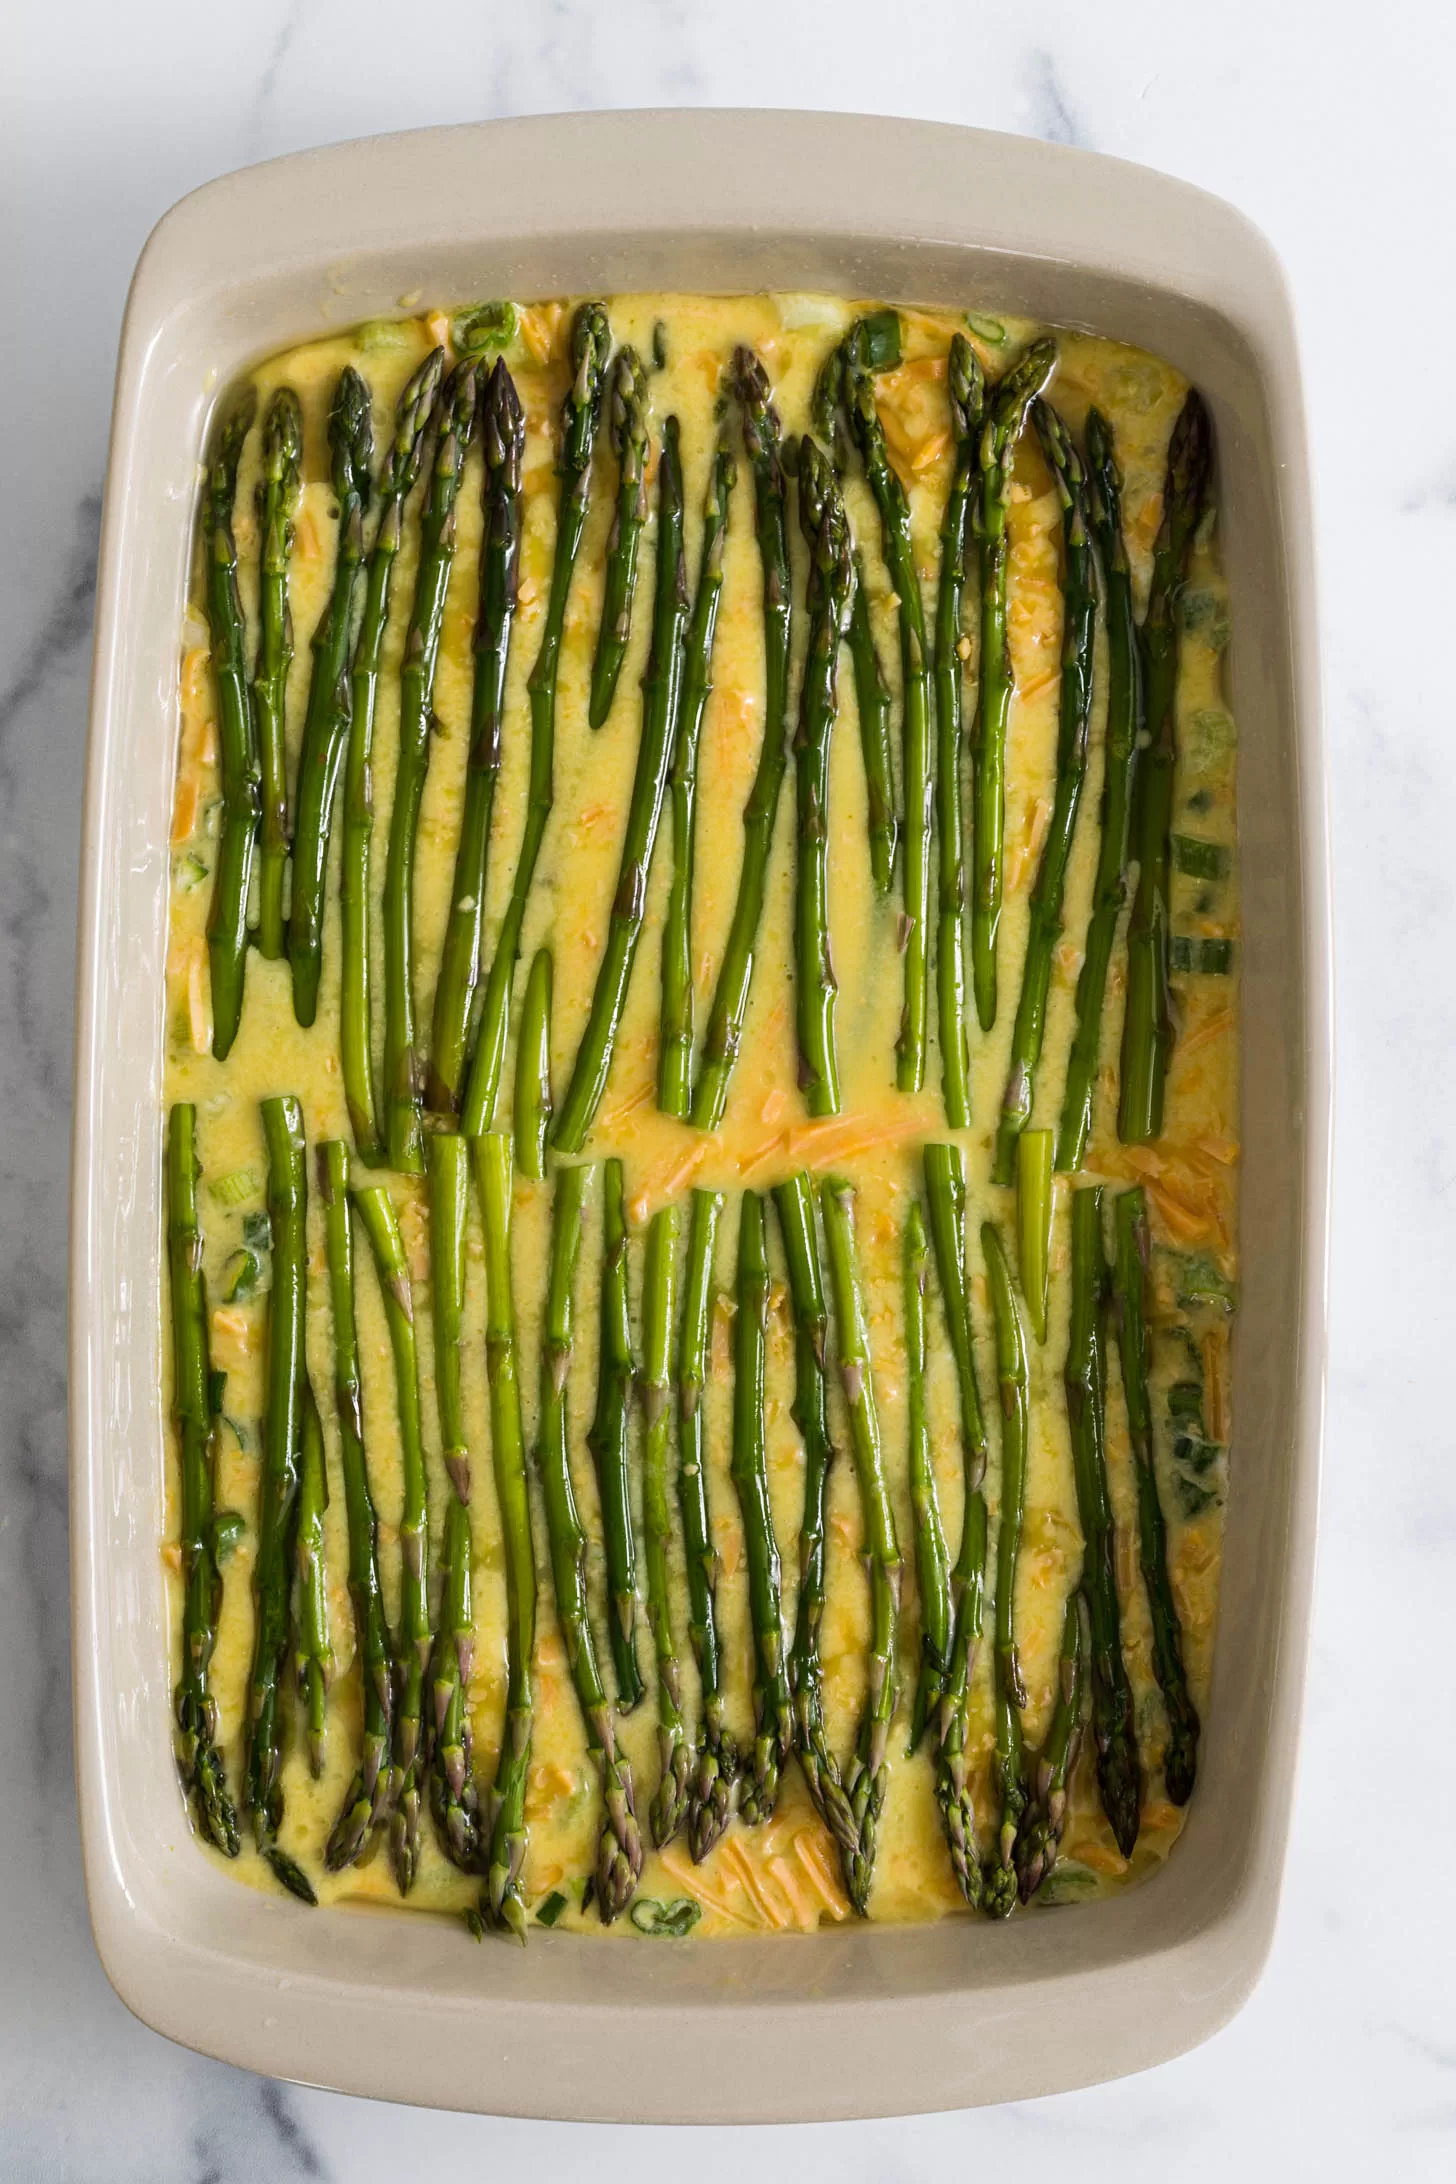 Asparagus spears lined up on top of egg casserole.